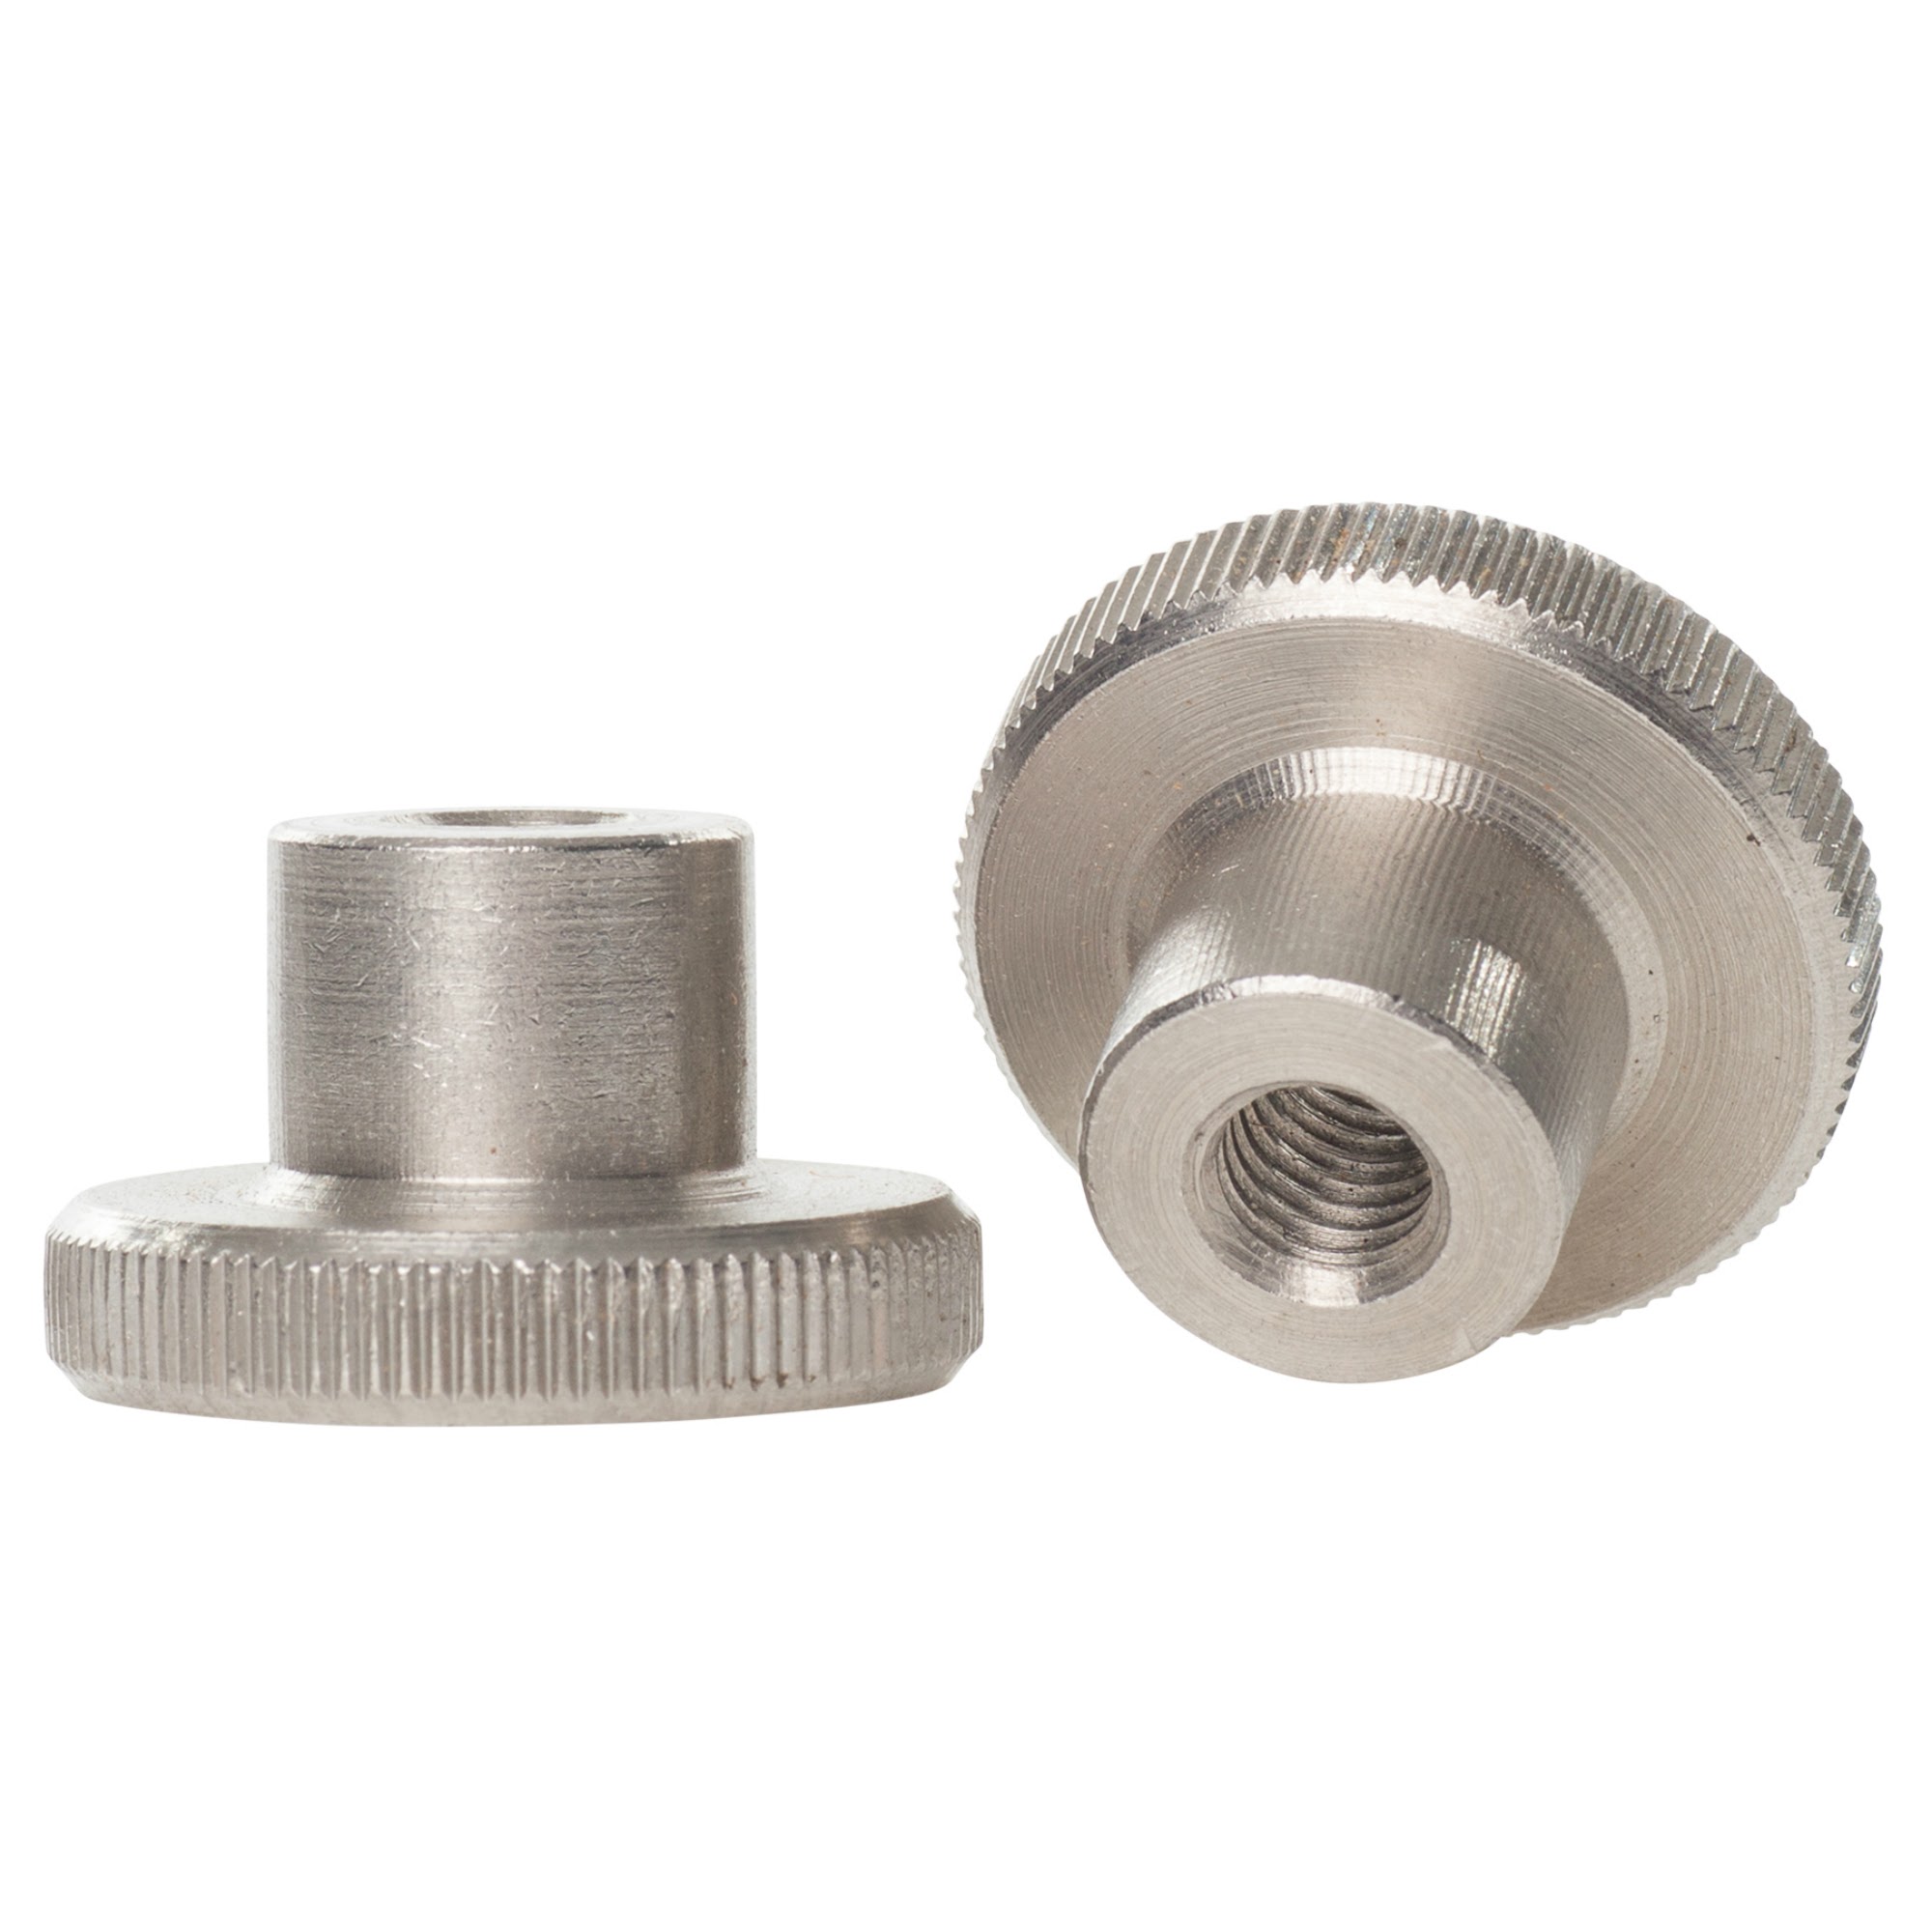 M4 DIN466 Knurled Thumb Nuts Female Thread 304 Stainless Steel Silver Round Hand Grip Knob Locking Nuts Pack of 10 